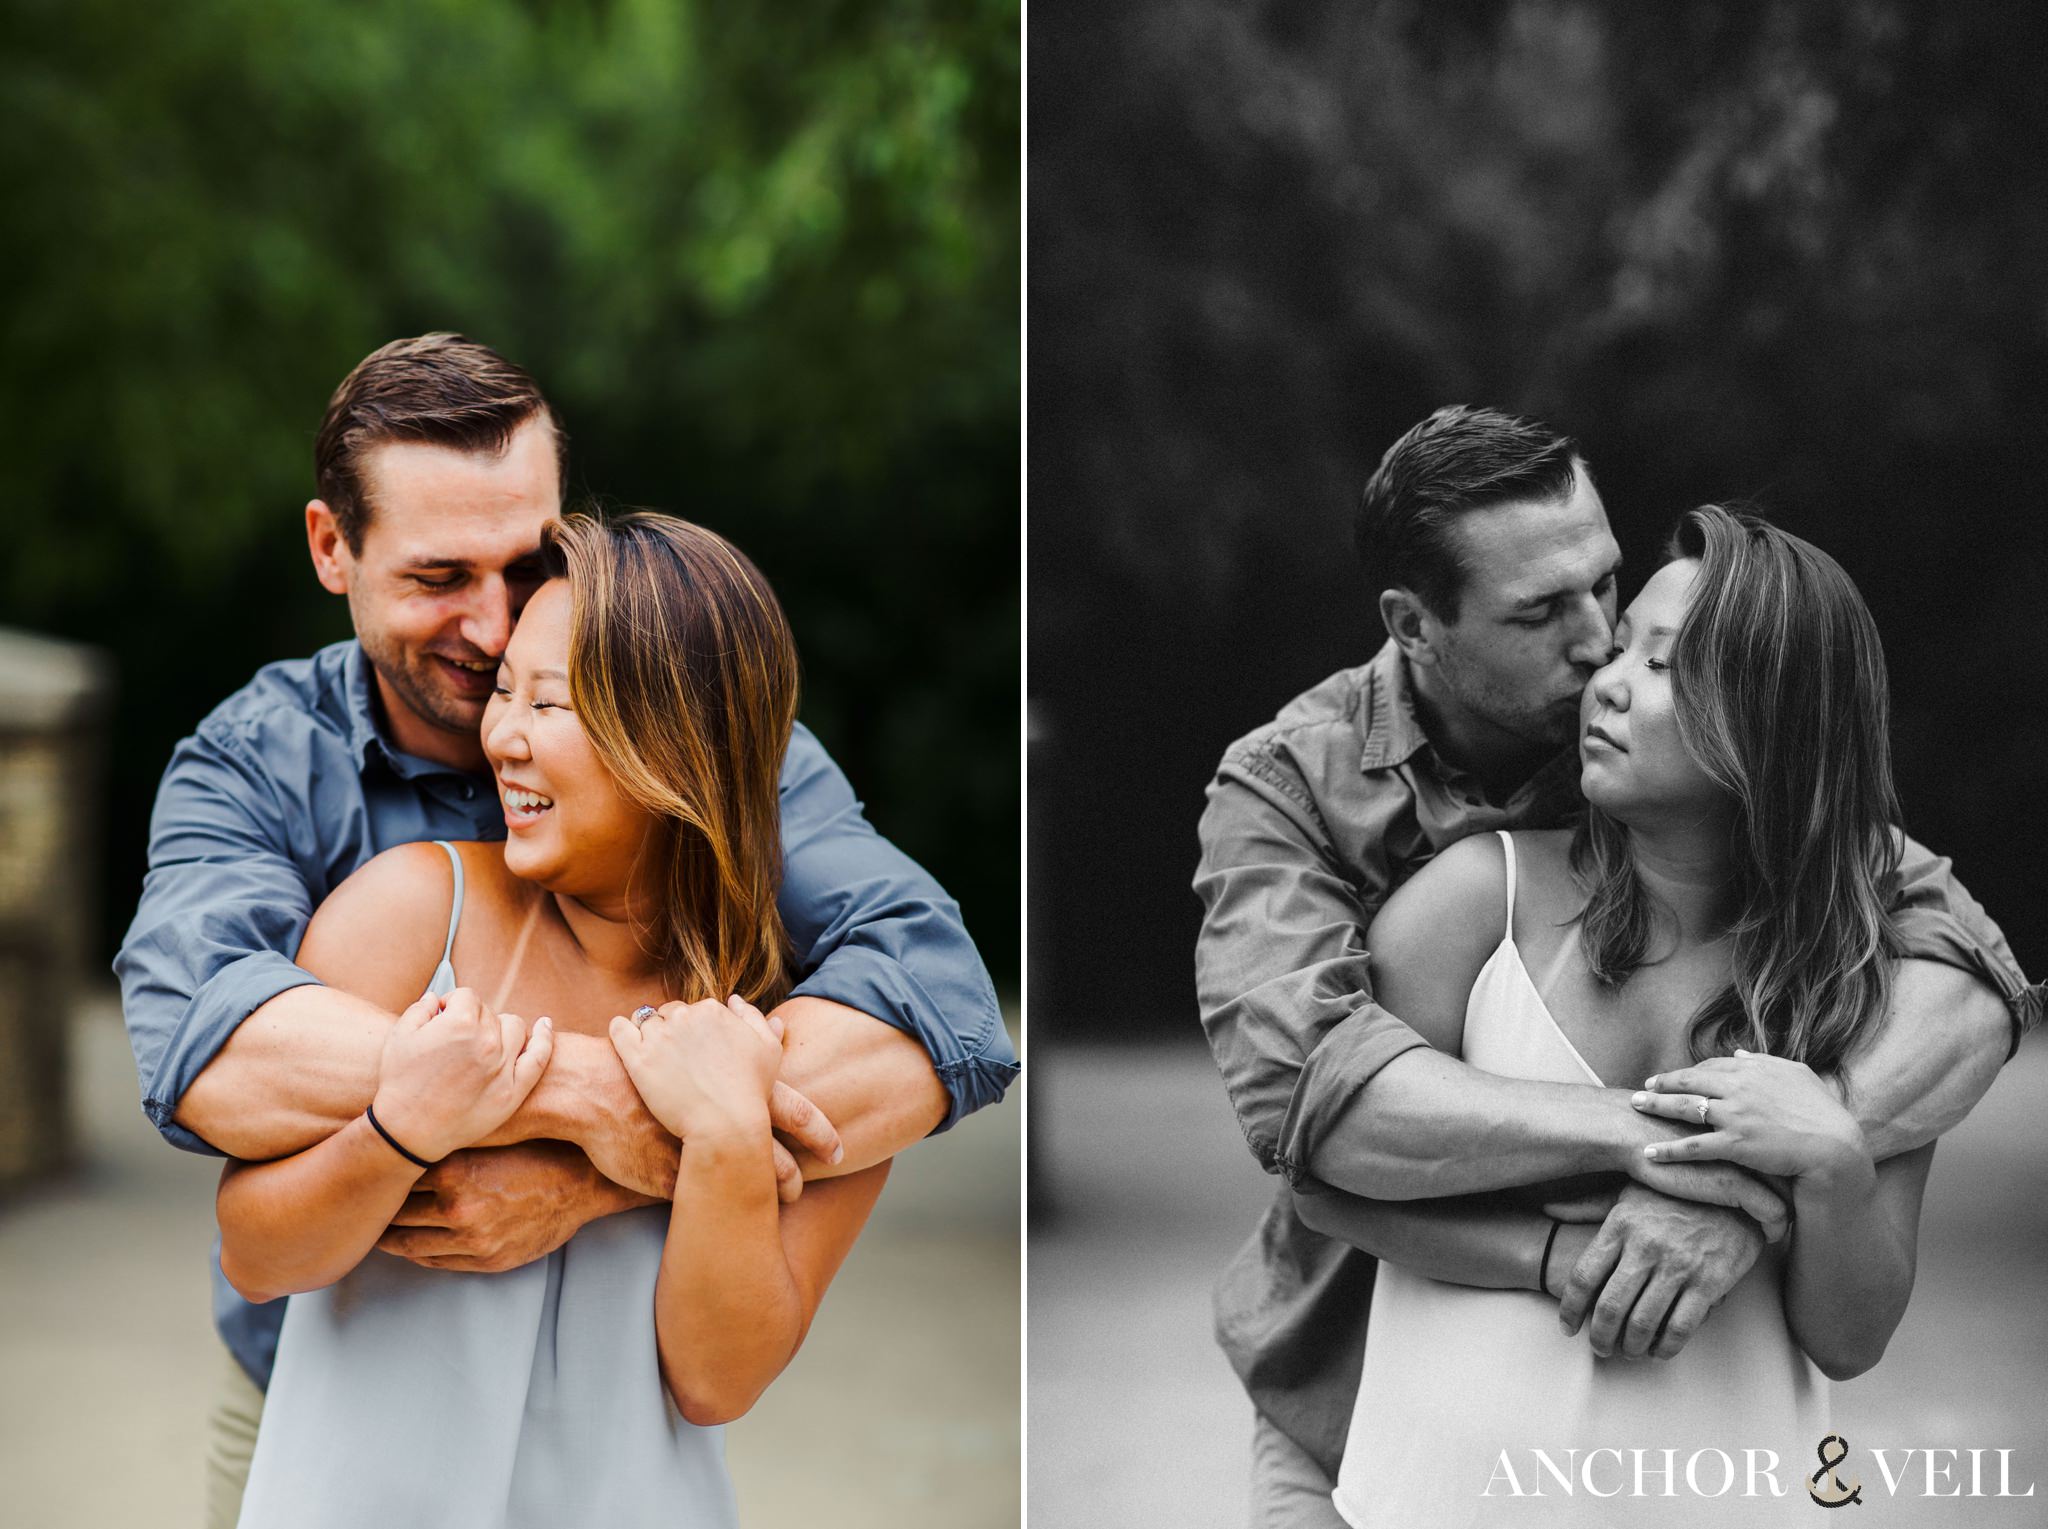 holding her tight and loving each other during their Freedom Park Engagement Session